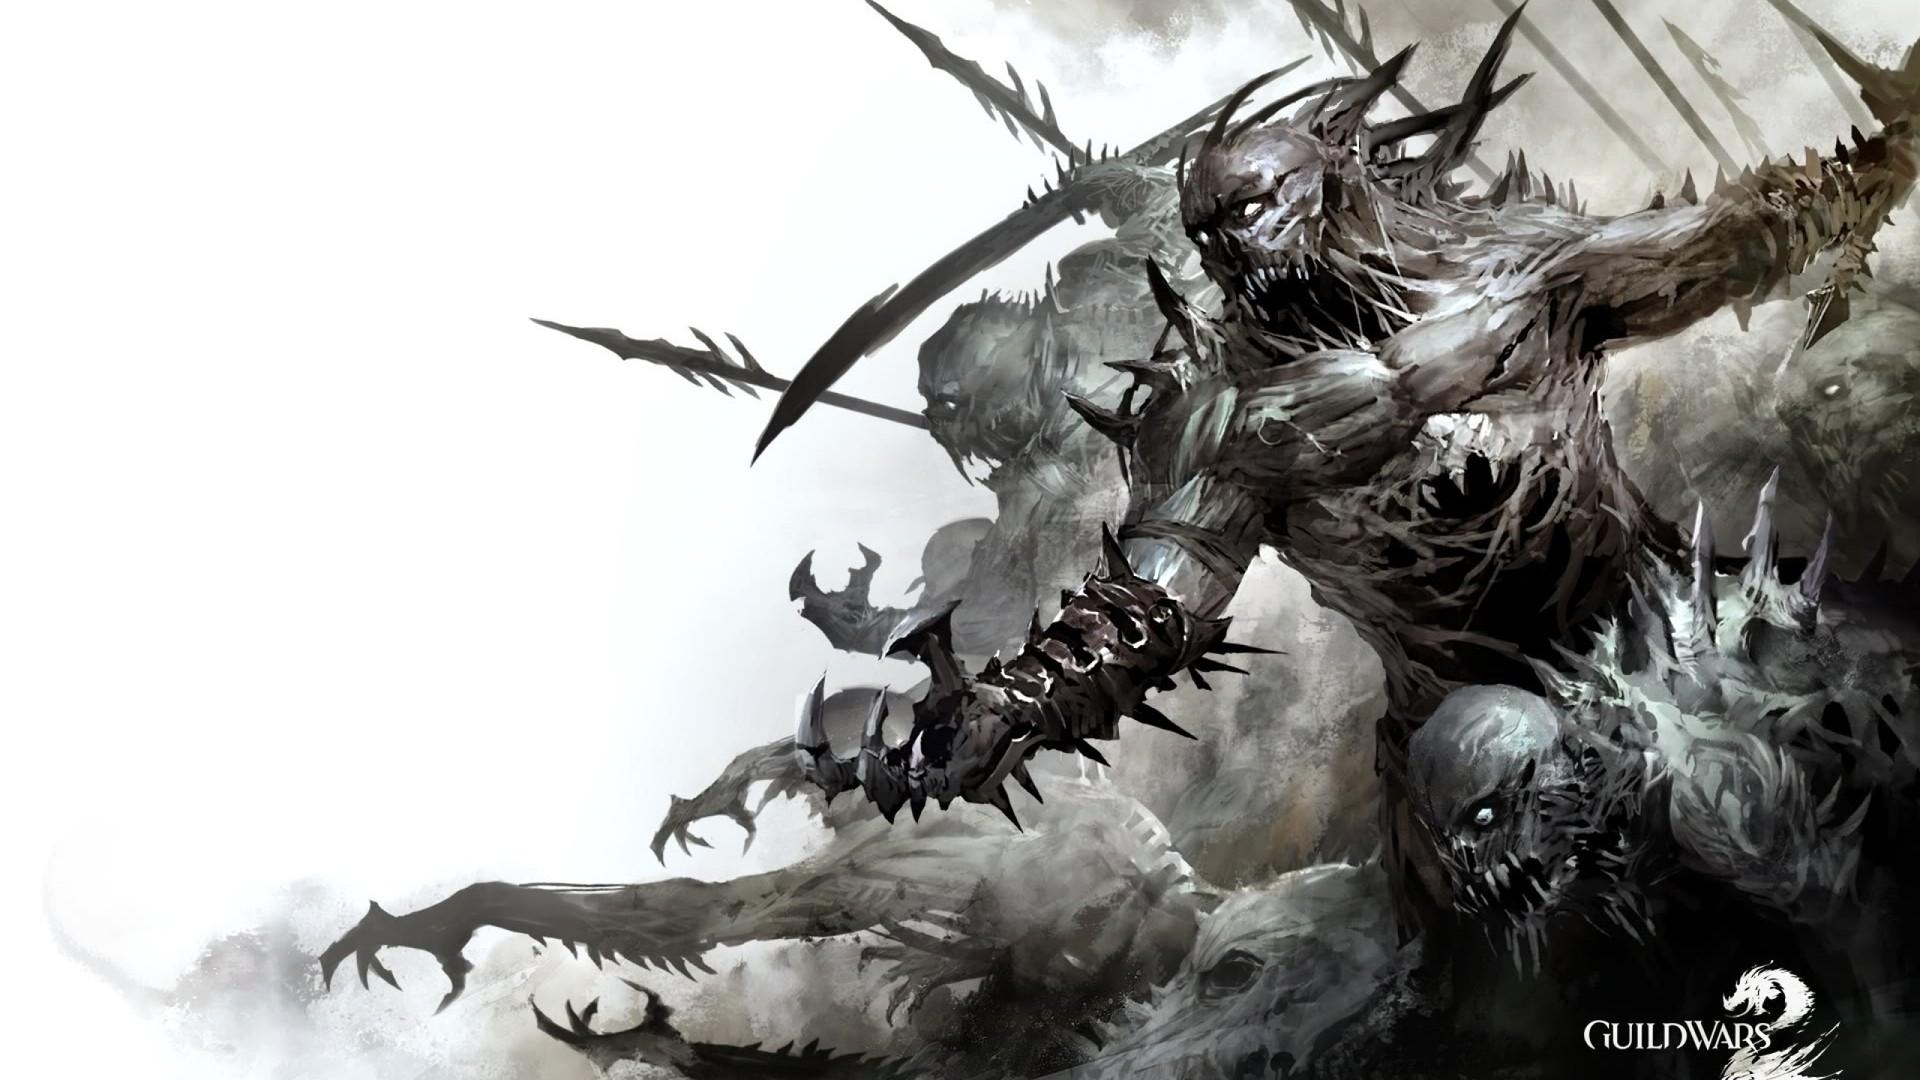 General 1920x1080 Guild Wars 2 undead PC gaming creature fantasy art video game art 2012 (Year) white background video game creatures